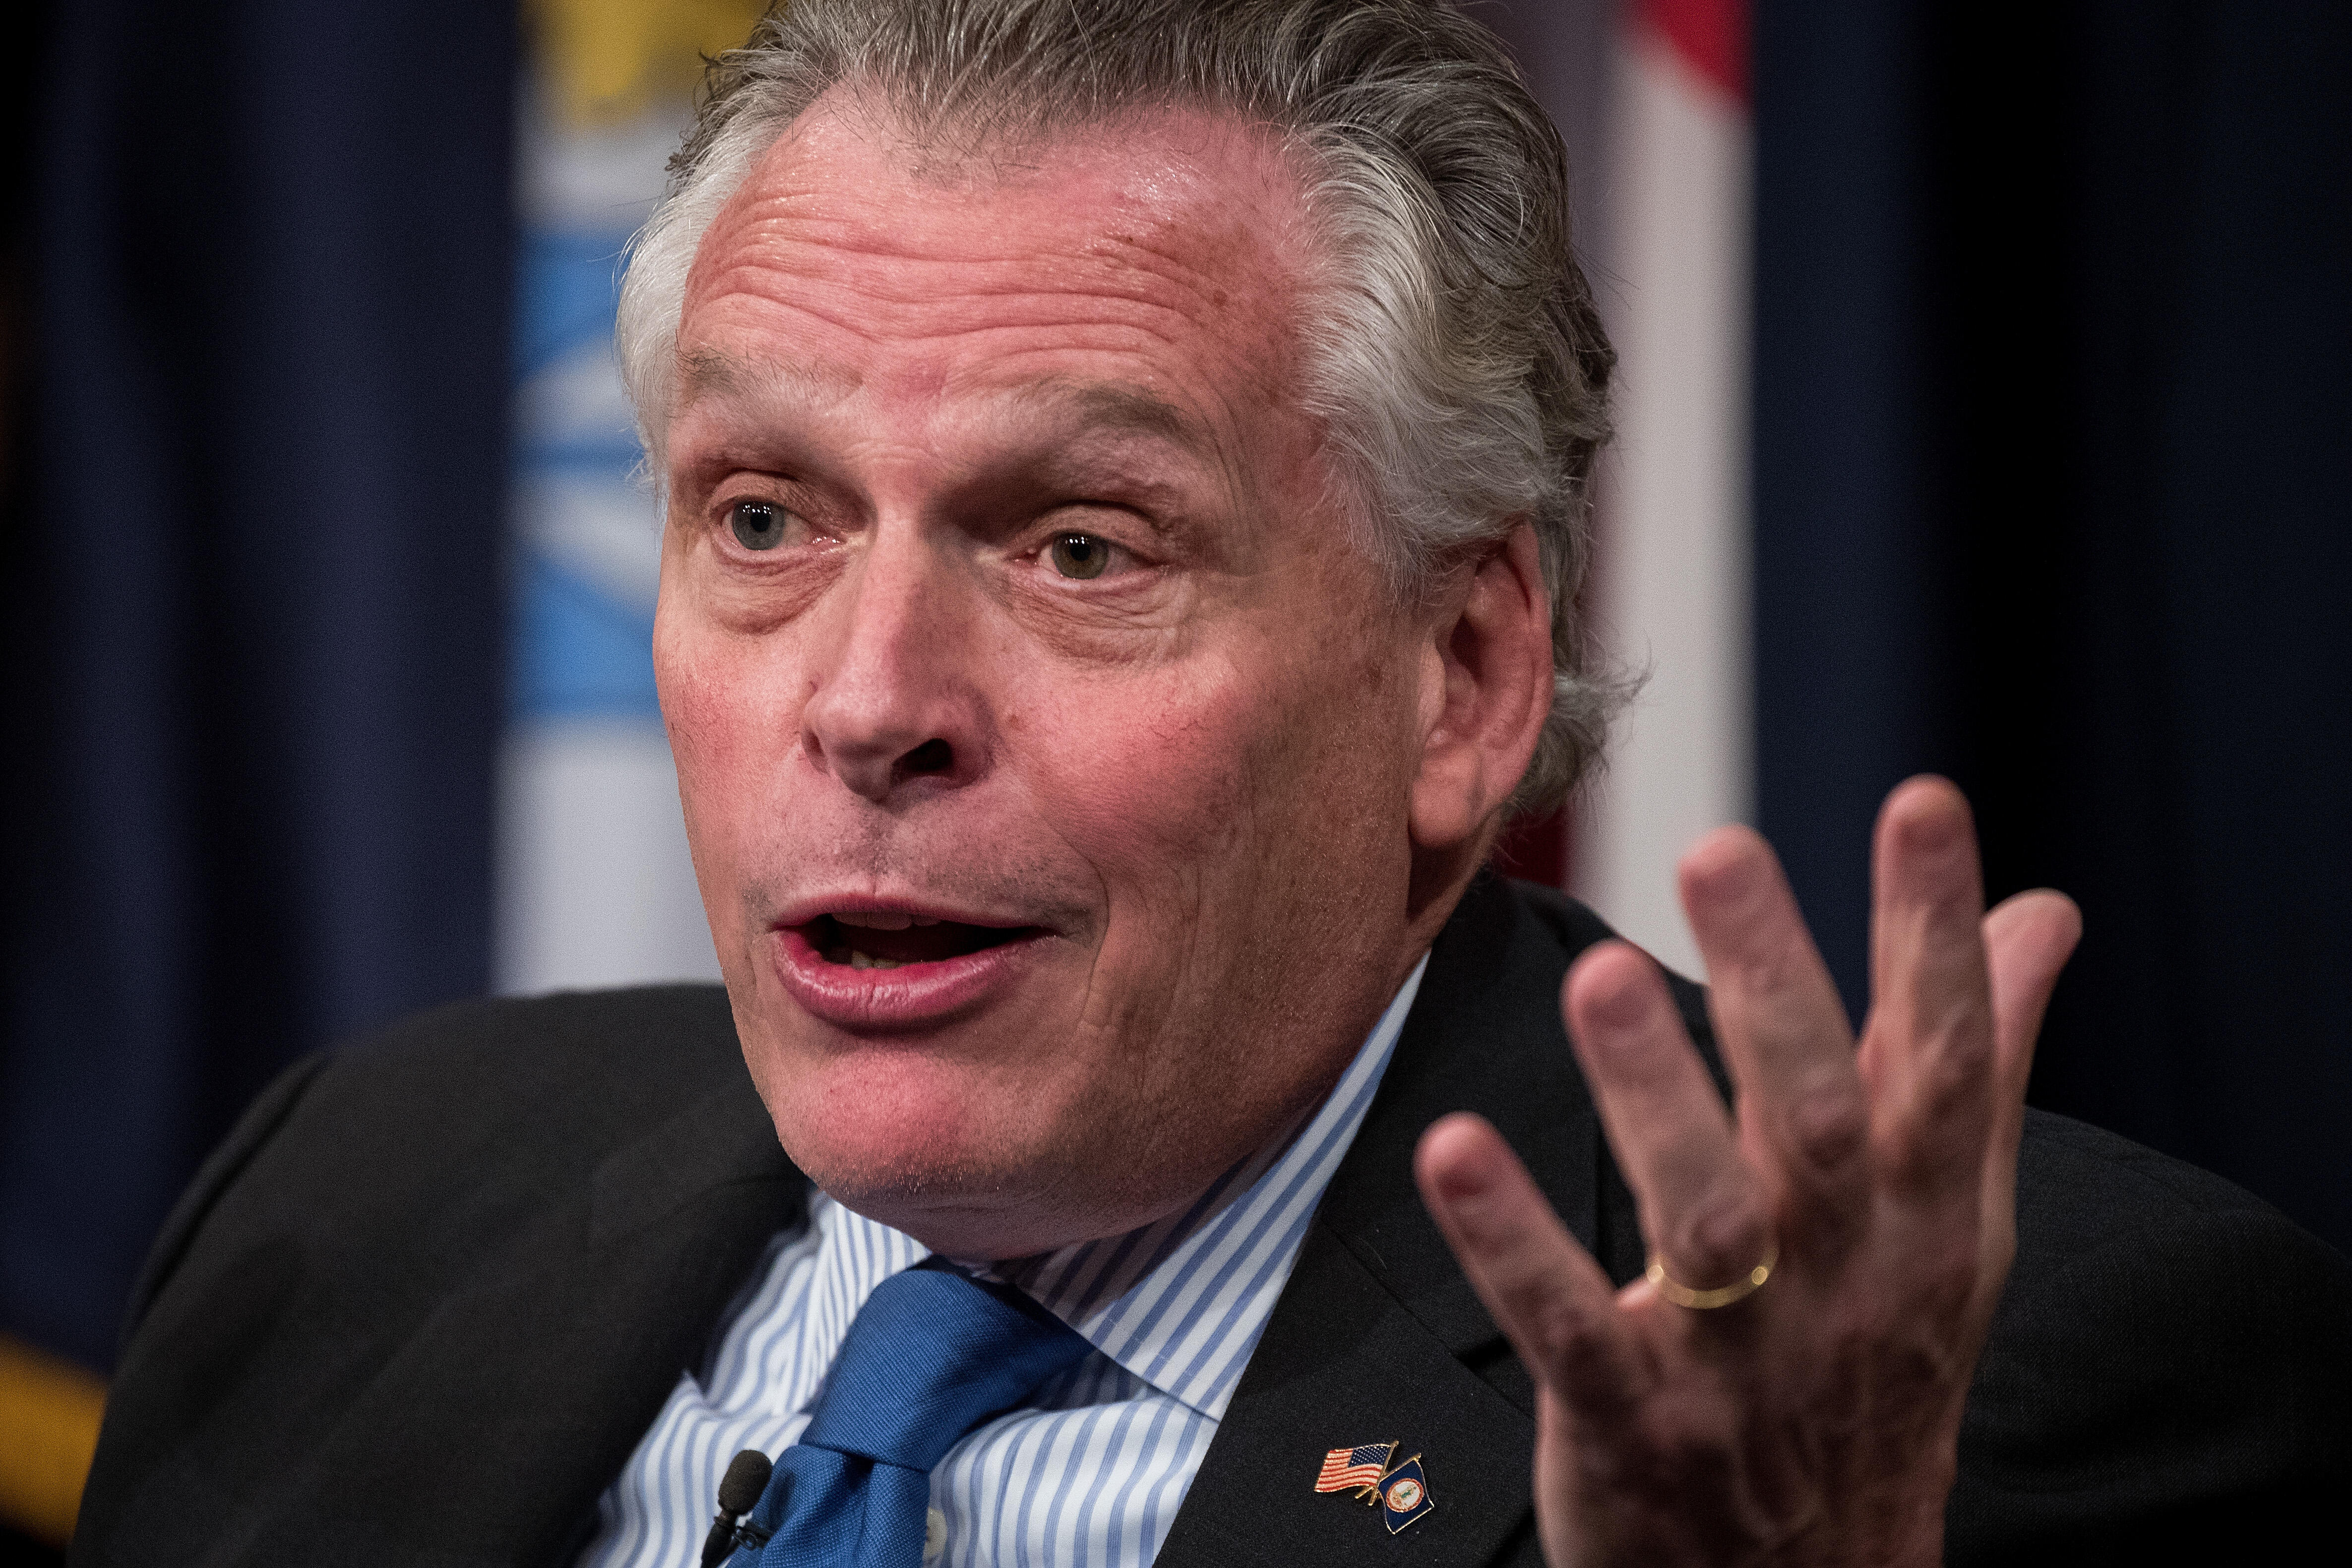 McAuliffe Expected To Make 2020 Announcement Soon - Thumbnail Image